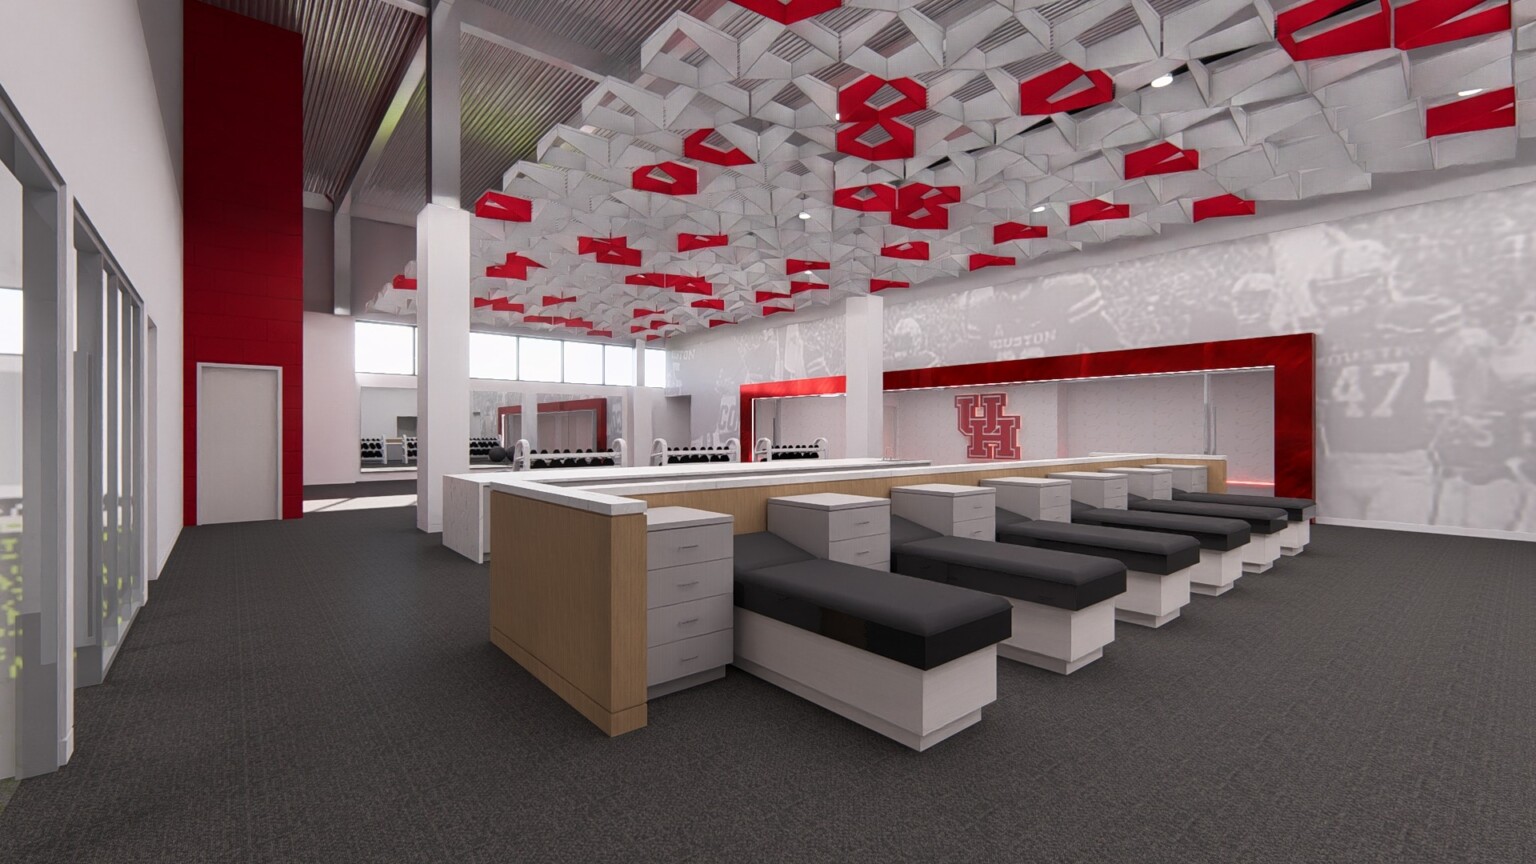 Sports medicine room with exam tables, modern artwork on the ceiling and wall murals highlighted by red accents